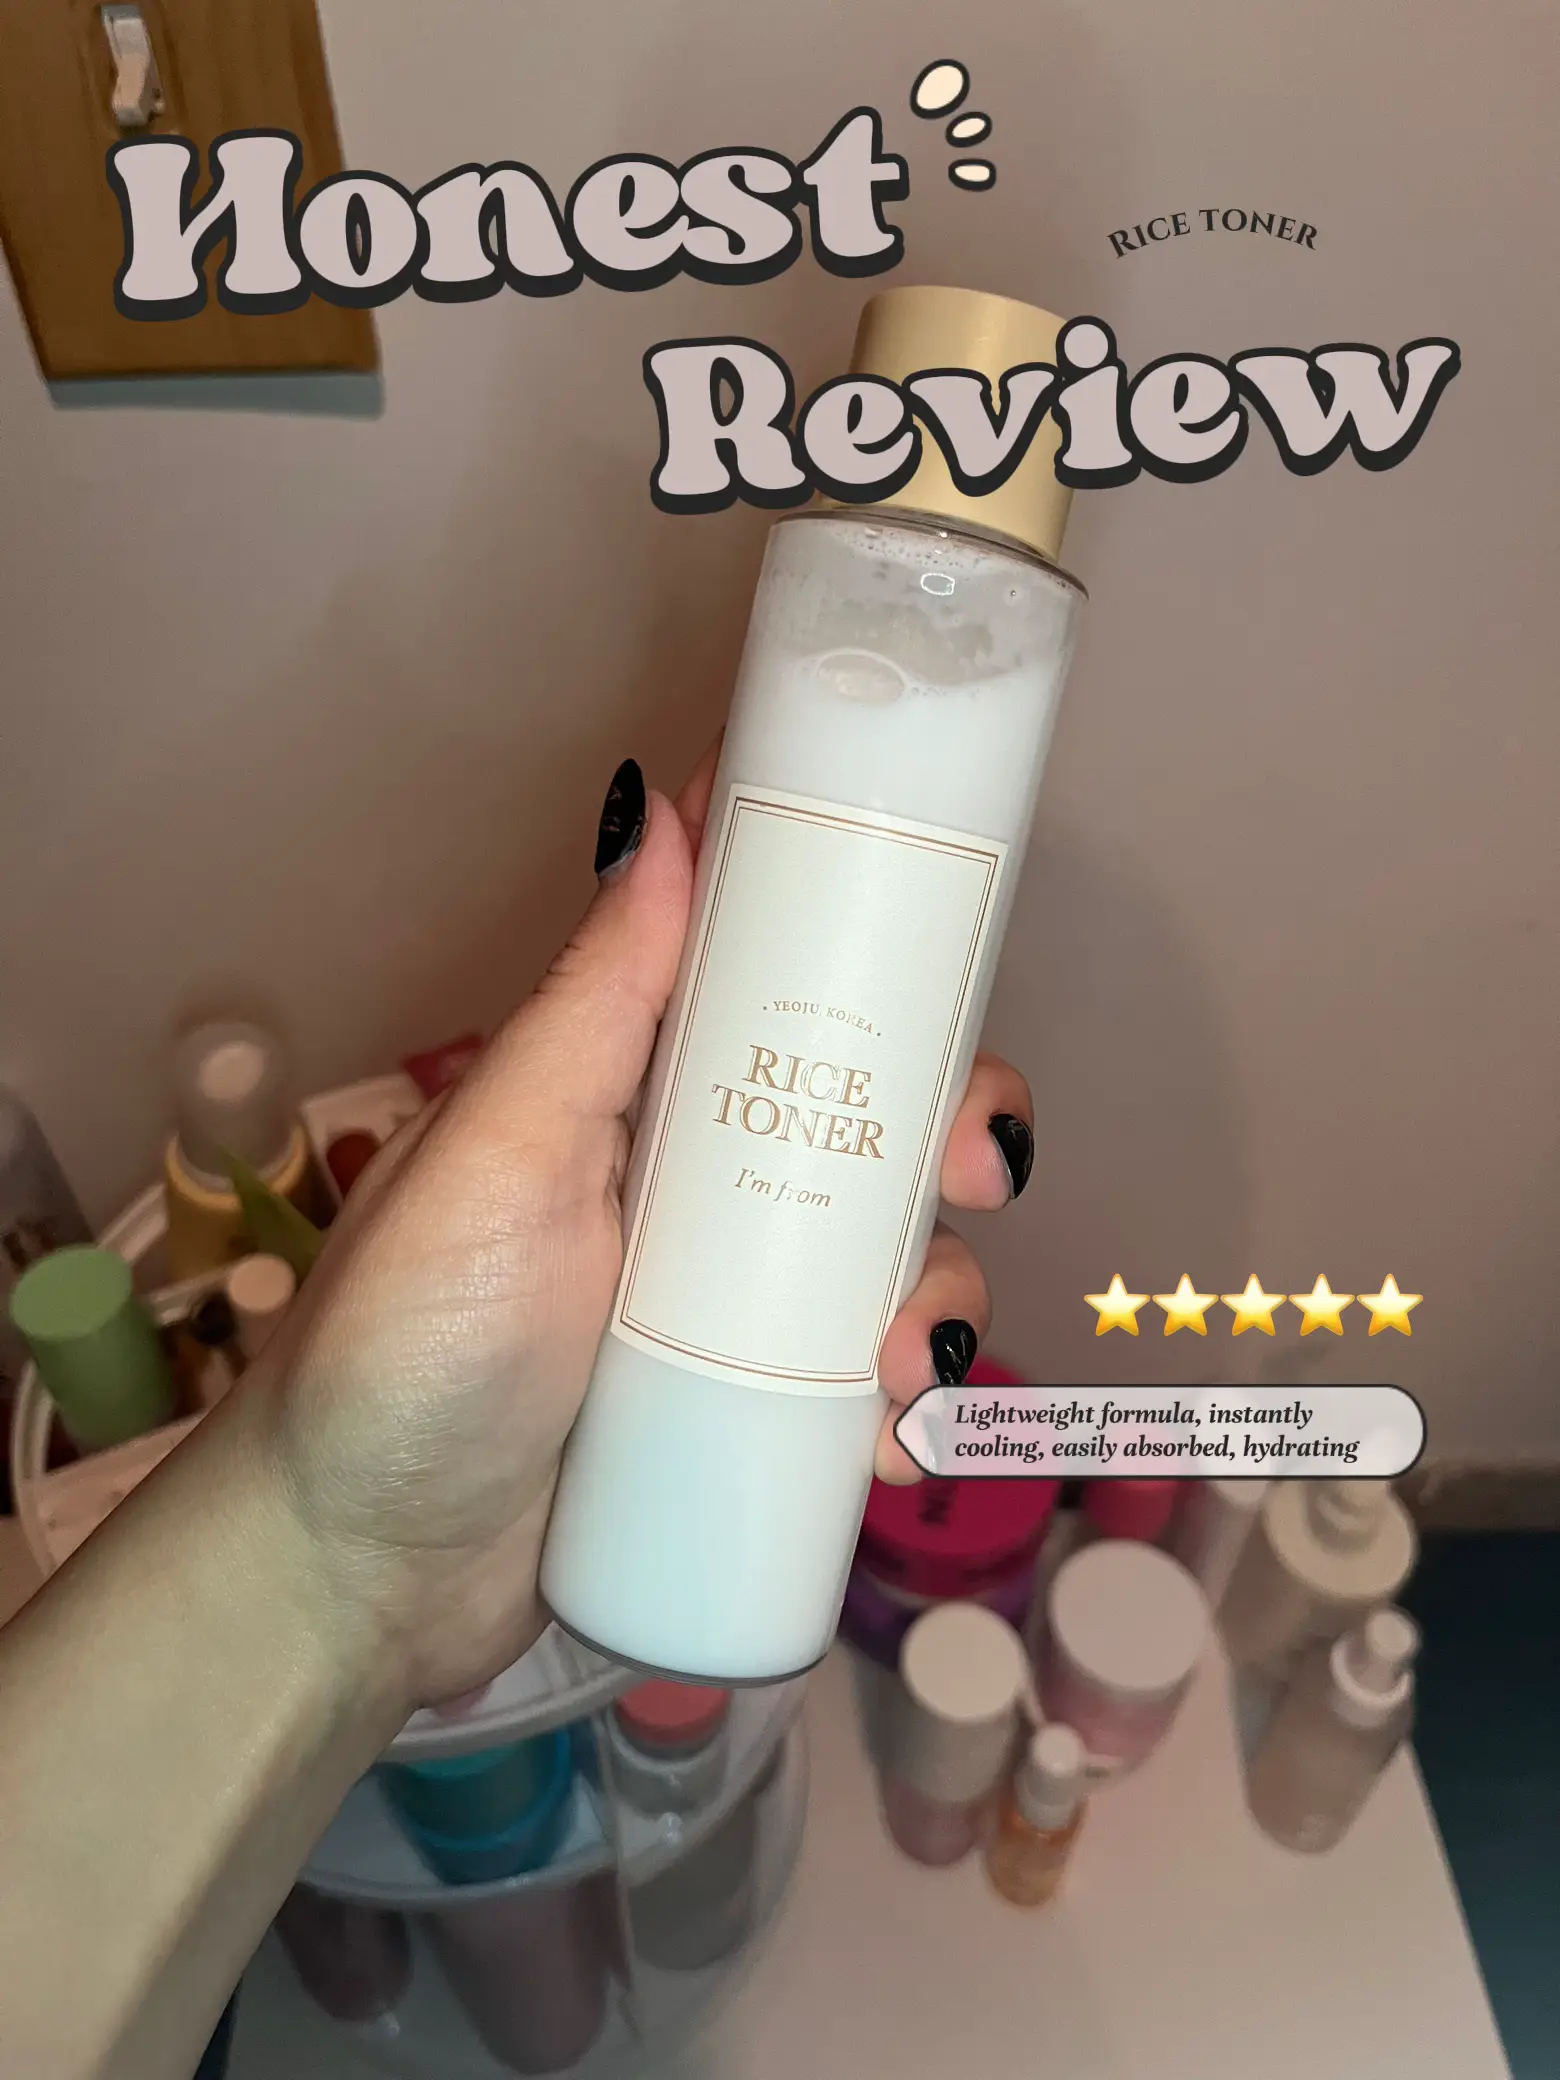 I'm from Rice Toner, 77.78% Rice Extract from Korea, Glow Essence with  Niacinamide, Hydrating for Dry Skin, Vegan, Alcohol Free, Fragrance Free,  Peta Approved, K Beauty Toner, 5.07 Fl Oz – Shining